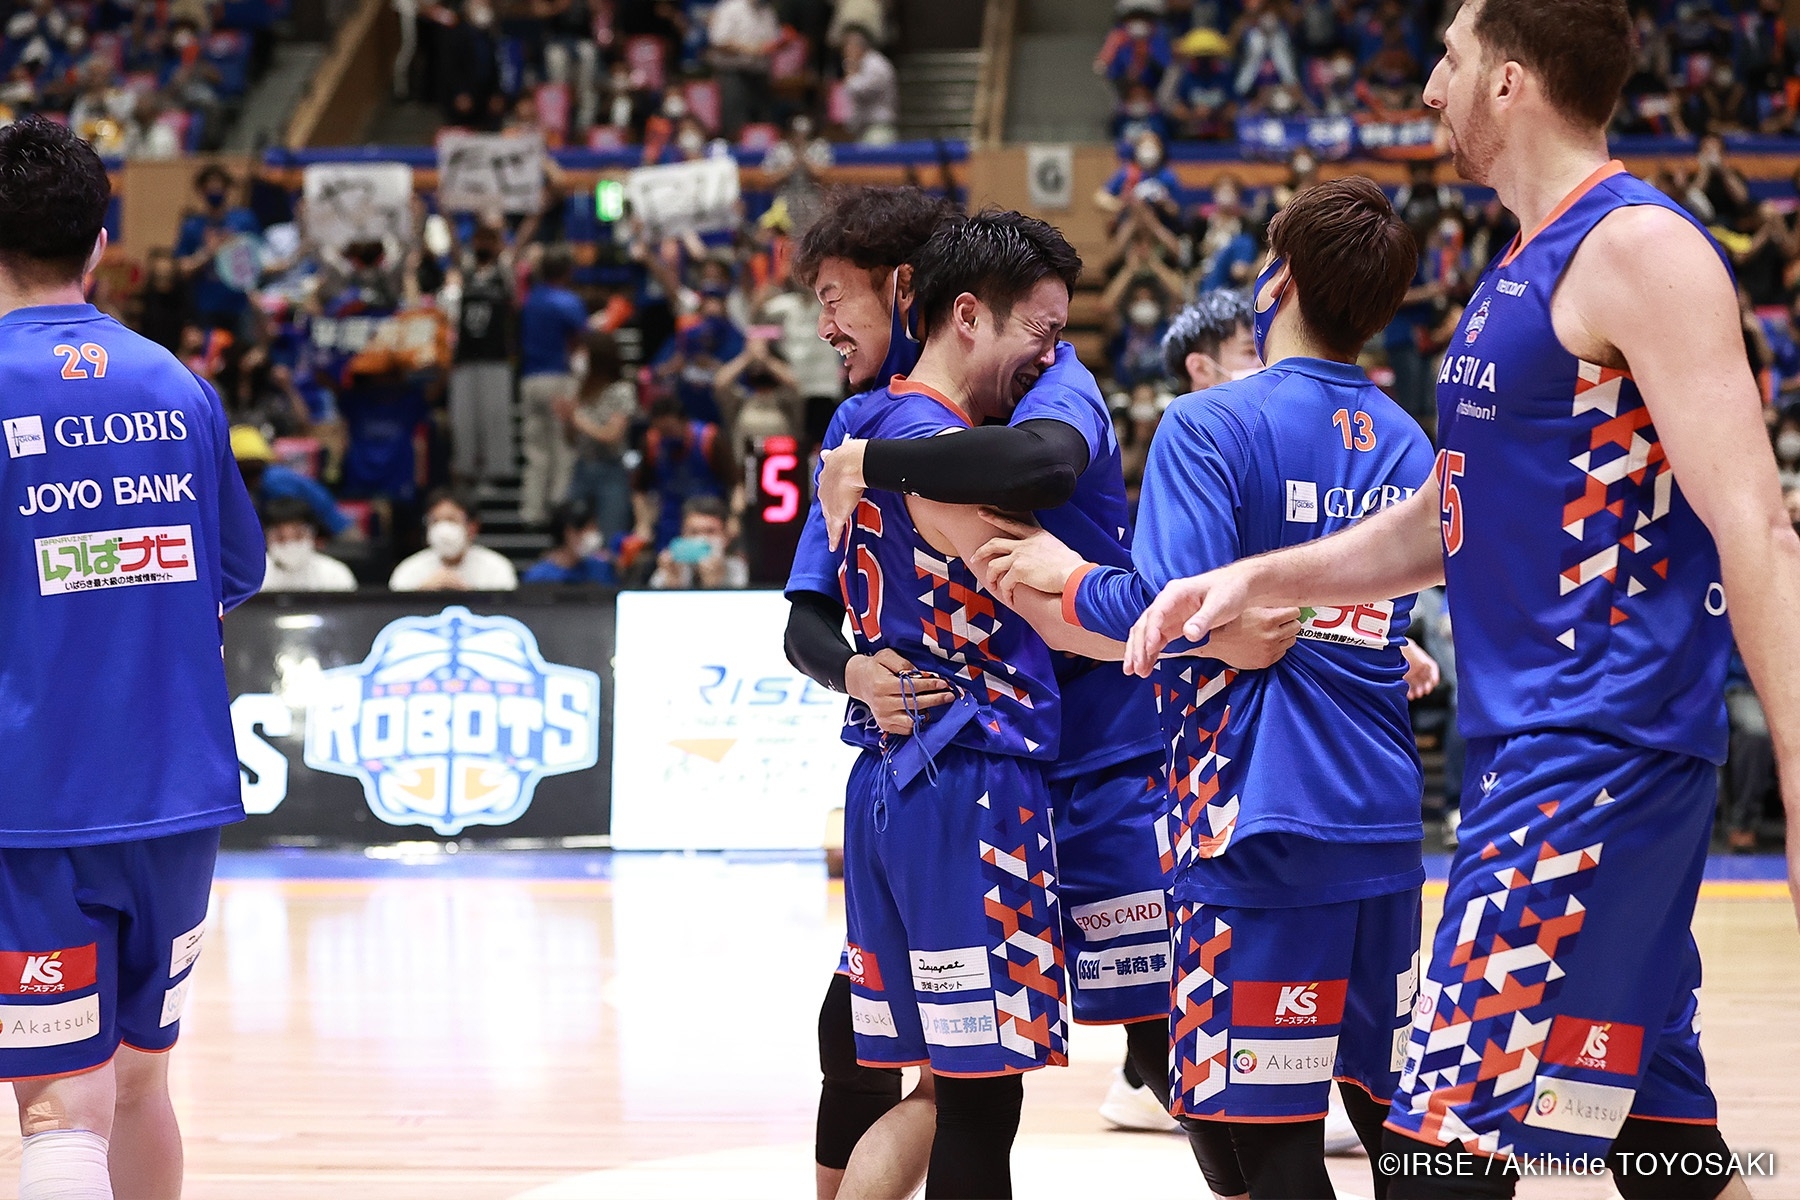 【AFTER GAME】ケーズデンキ presents B2 PLAYOFFS SEMIFINALS 2020-21 仙台戦（5/15～16）~皆で勝ち取ったB1昇格。そして、いざ最終決戦へ~